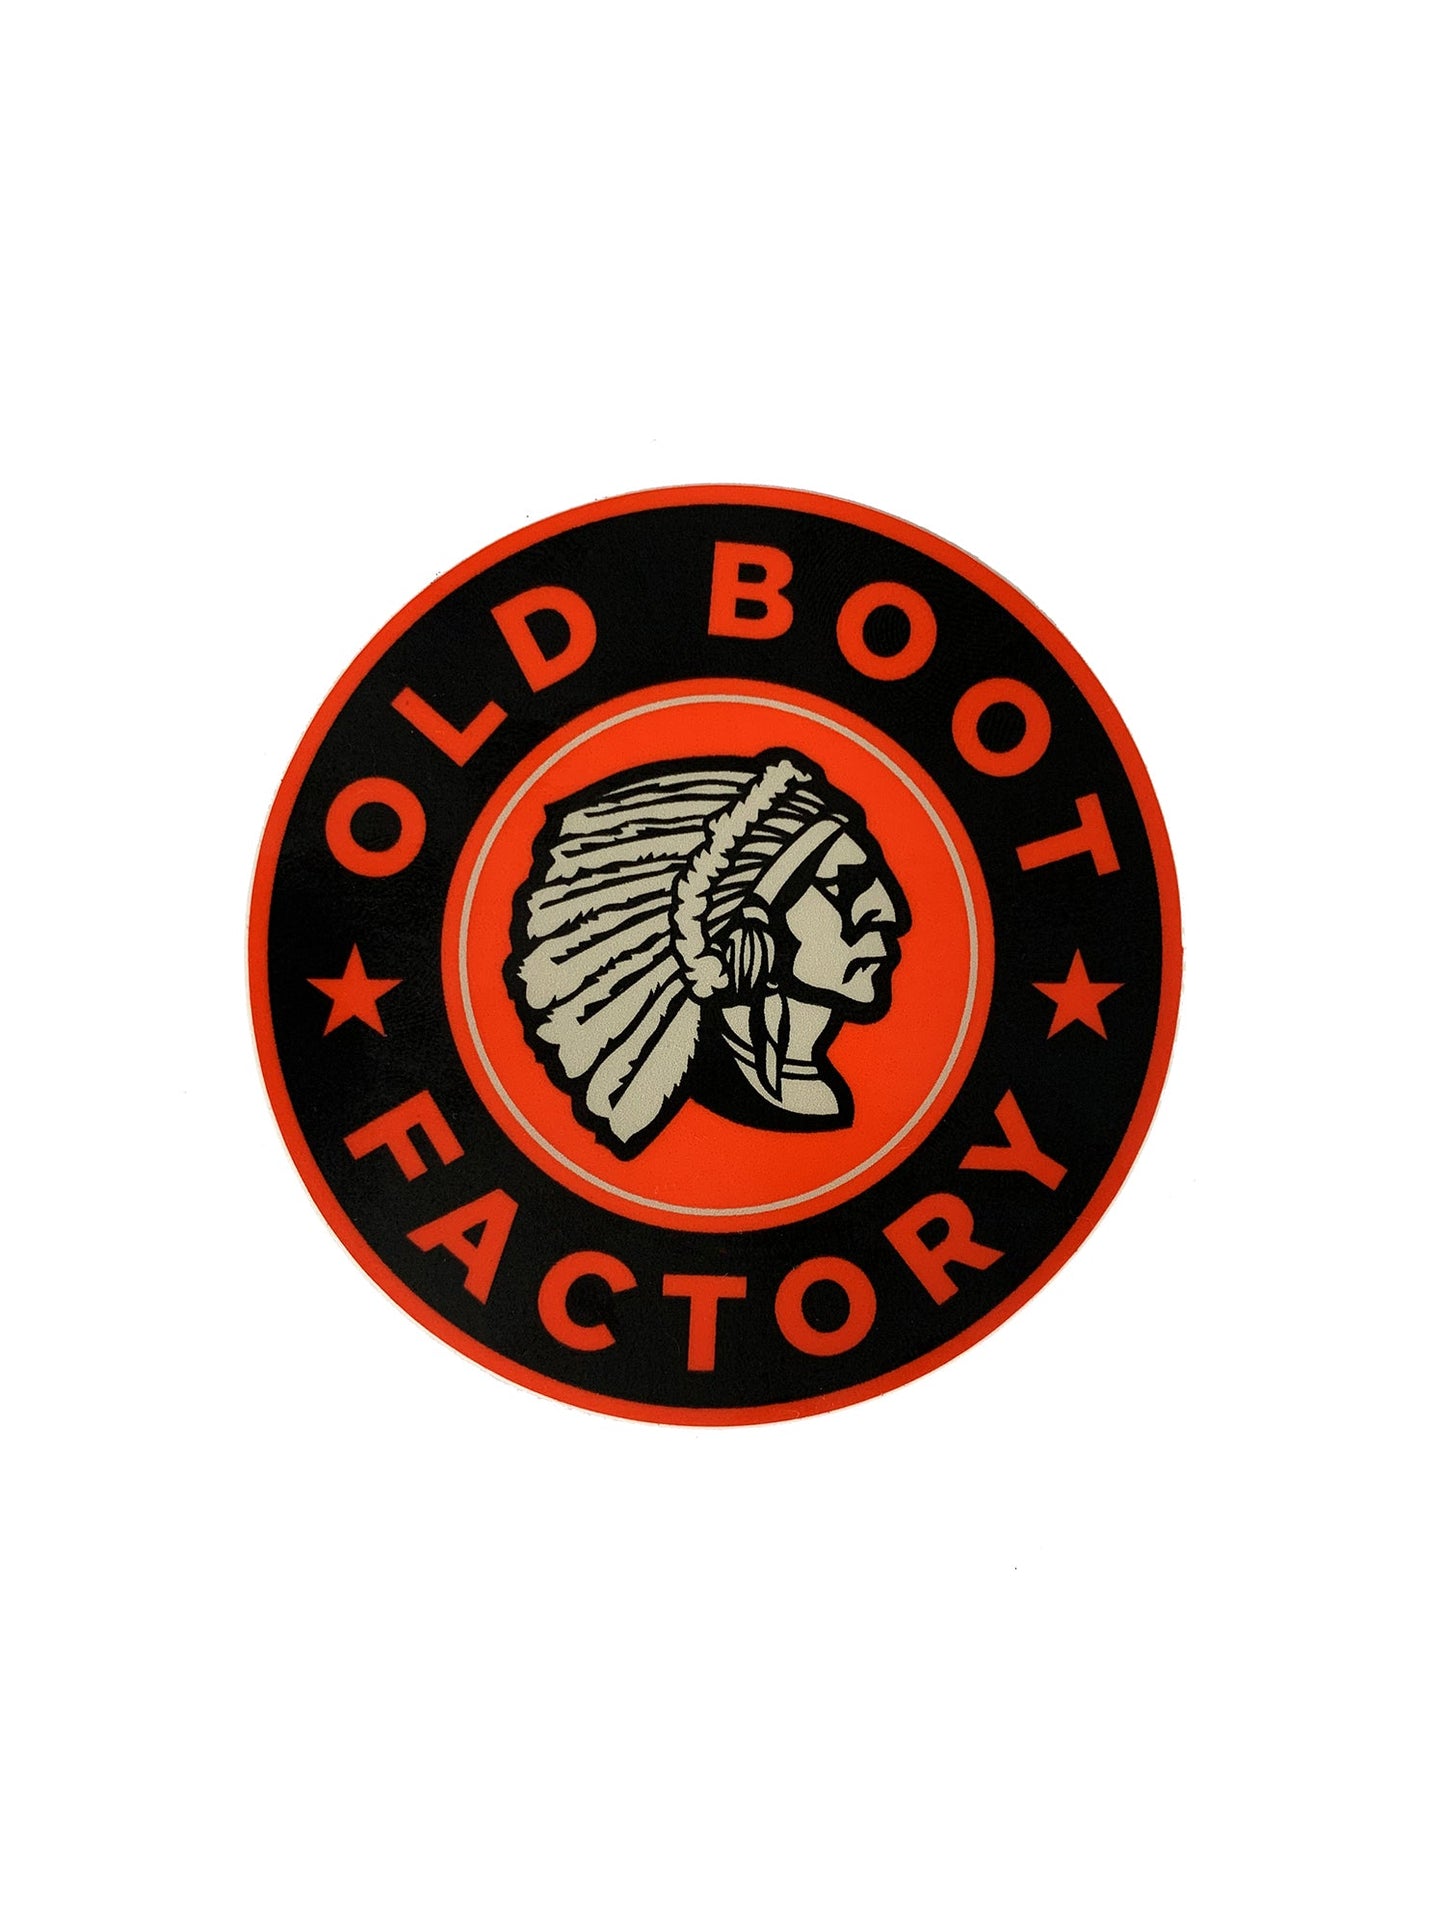 OBFS001 Old Boot Factory Sticker